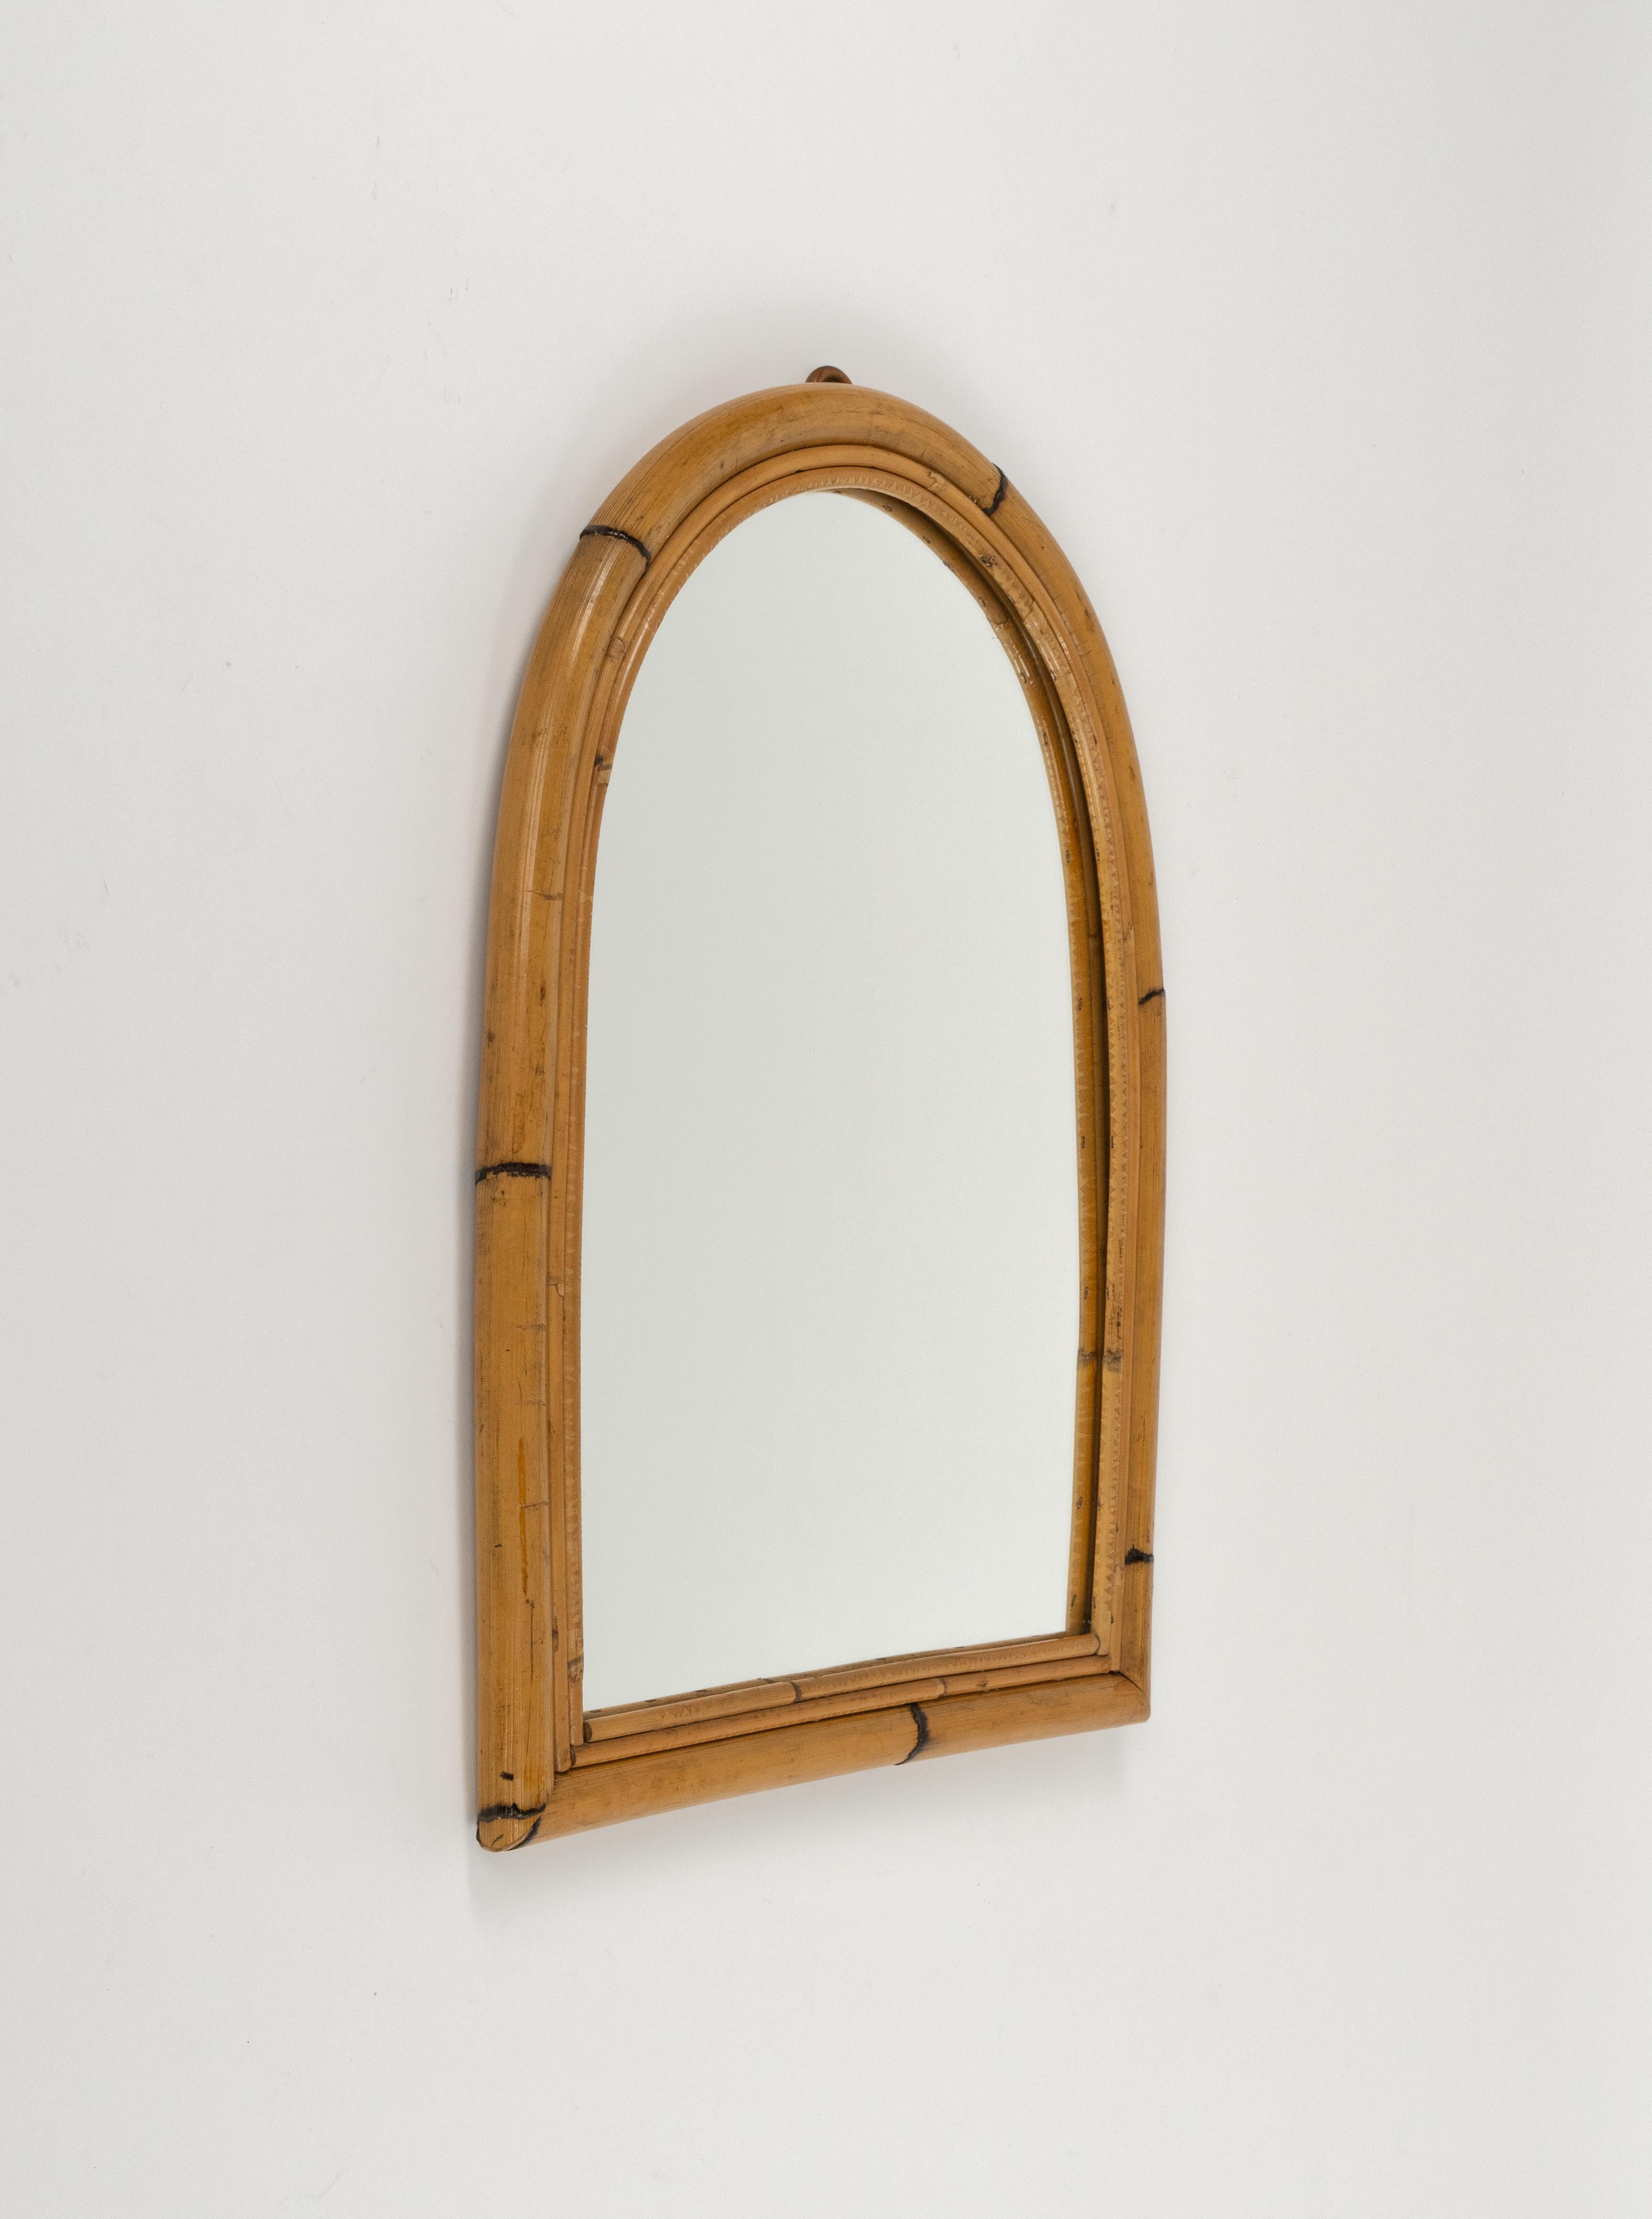 Midcentury beautiful arched wall mirror in bamboo and rattan.

Made in Italy in the 1960s.

The mirror would be perfect for a bedroom, dressing room, cloakroom or hallway.